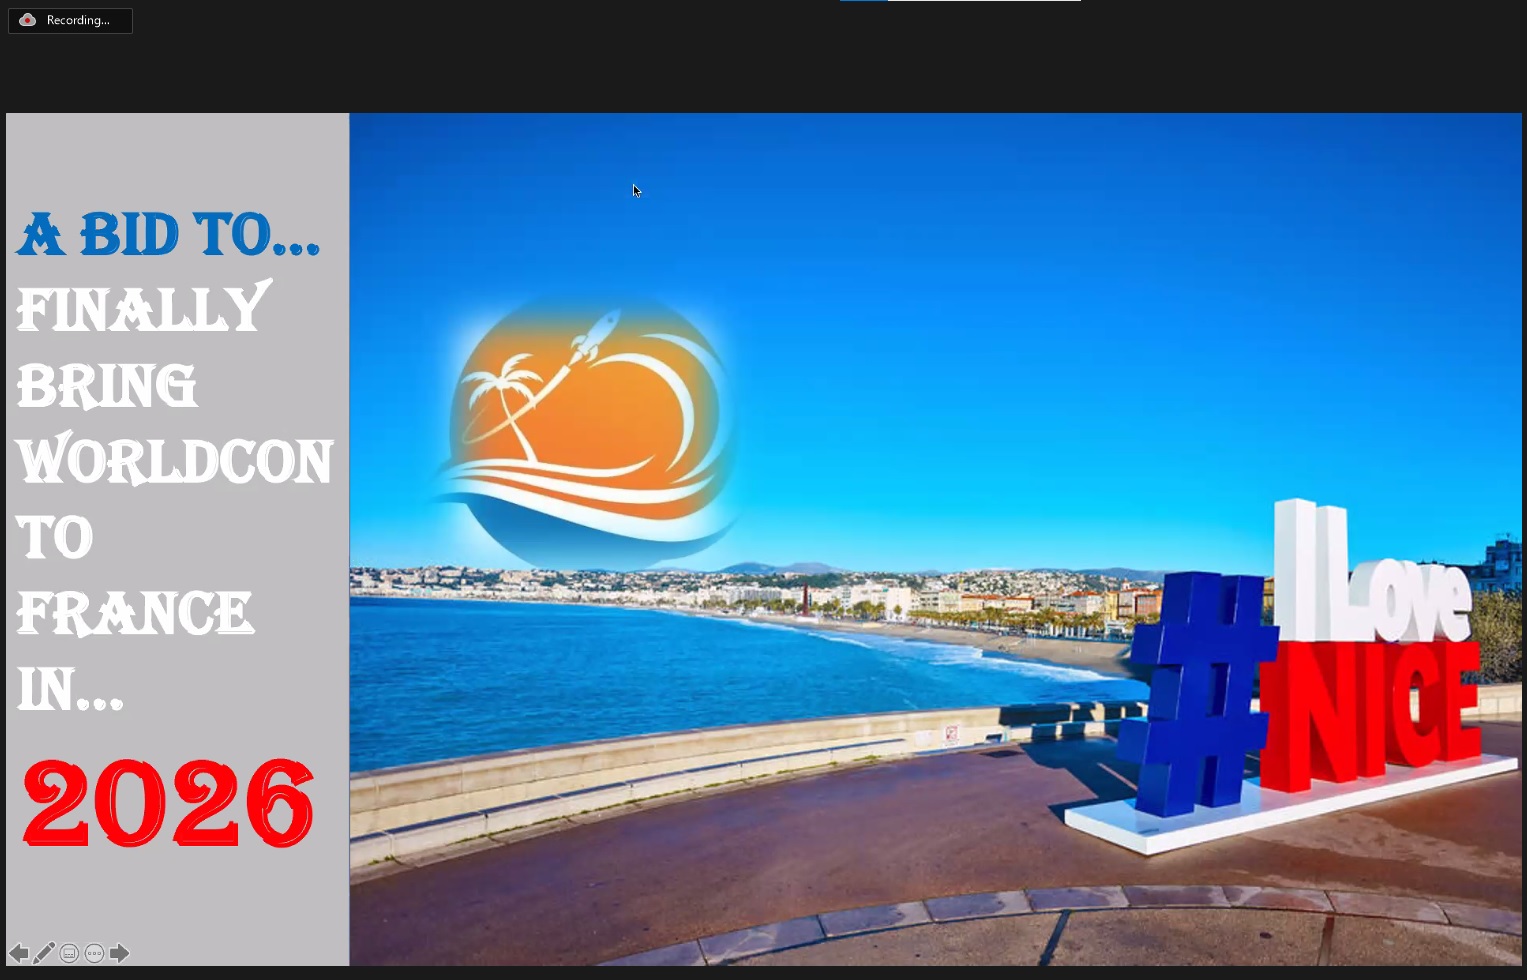 Screenshot from Zoom. On the left it is written 'A bid to... finally bring Worldcon to France in... 2026'. To the right there is a picture showing the sea, the beach, and a big 'sculpture' stating '#I Love Nice'.